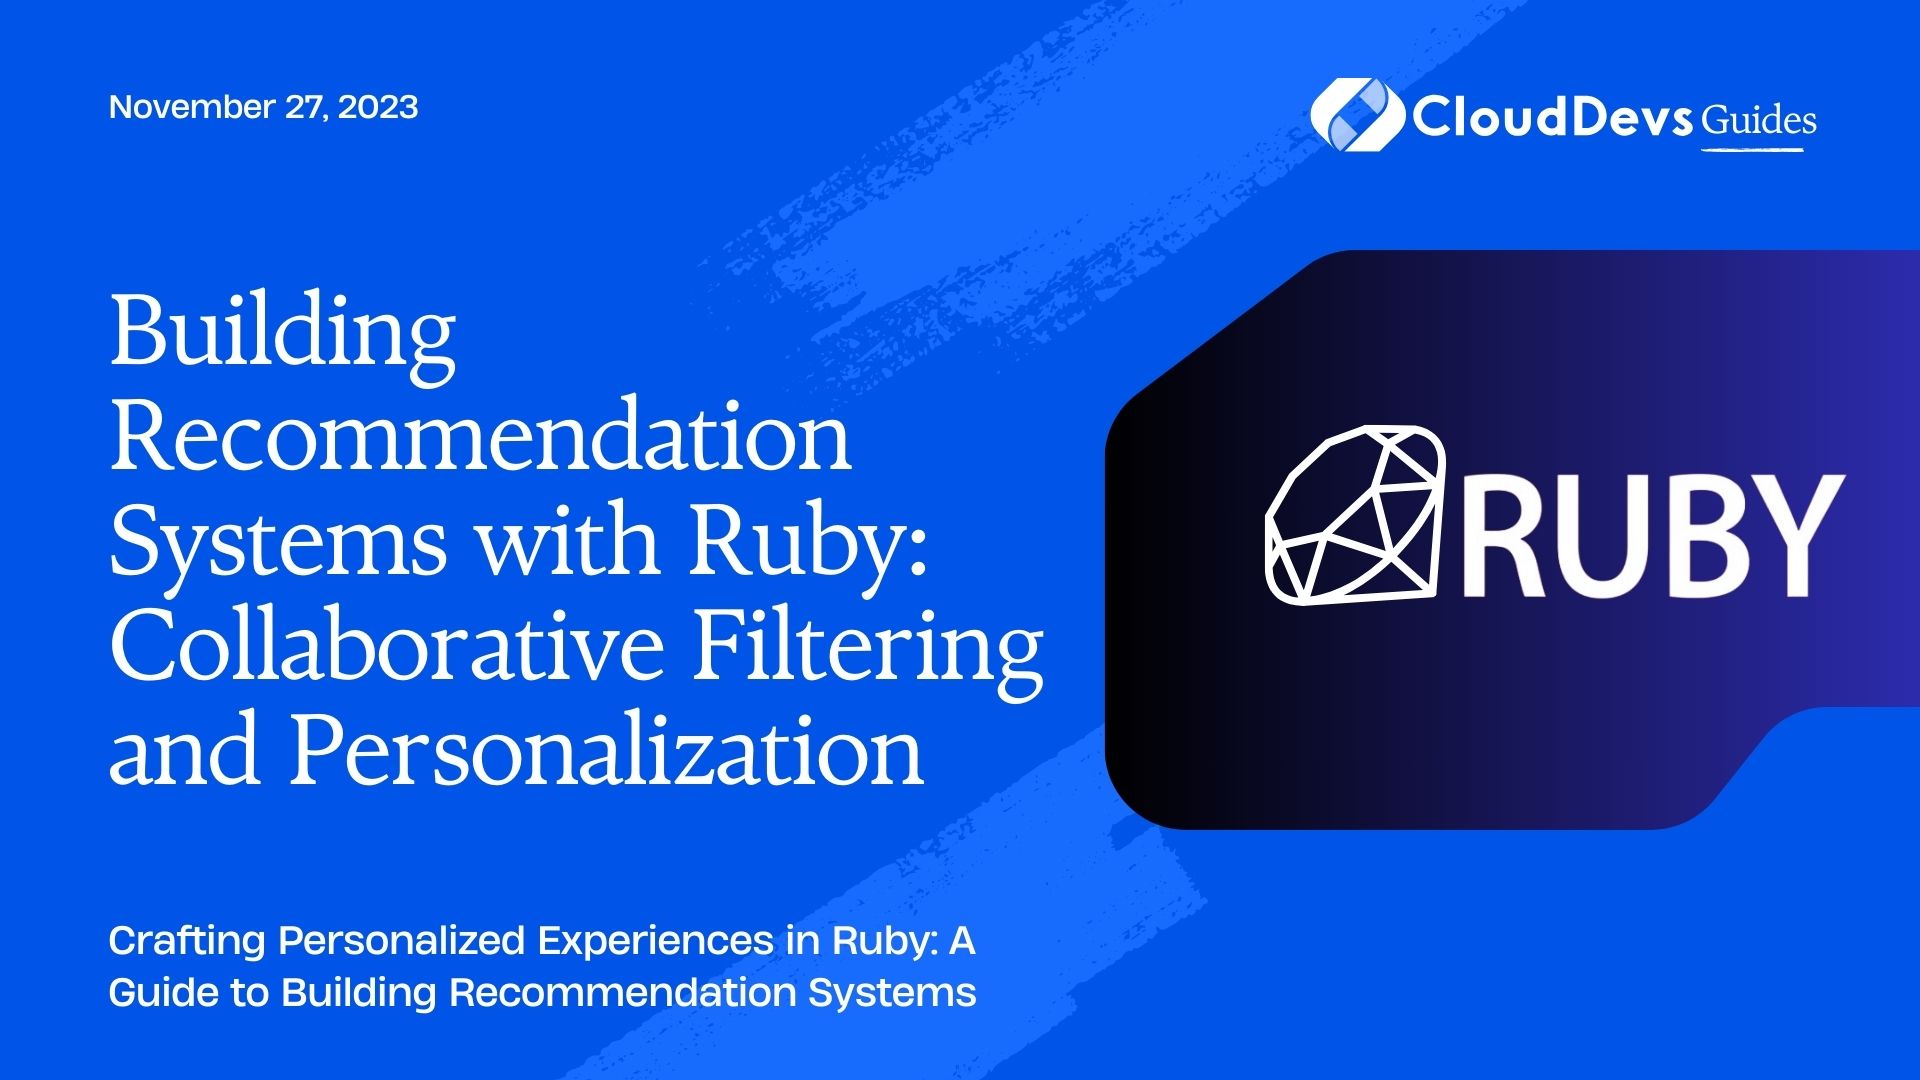 Building Recommendation Systems with Ruby: Collaborative Filtering and Personalization